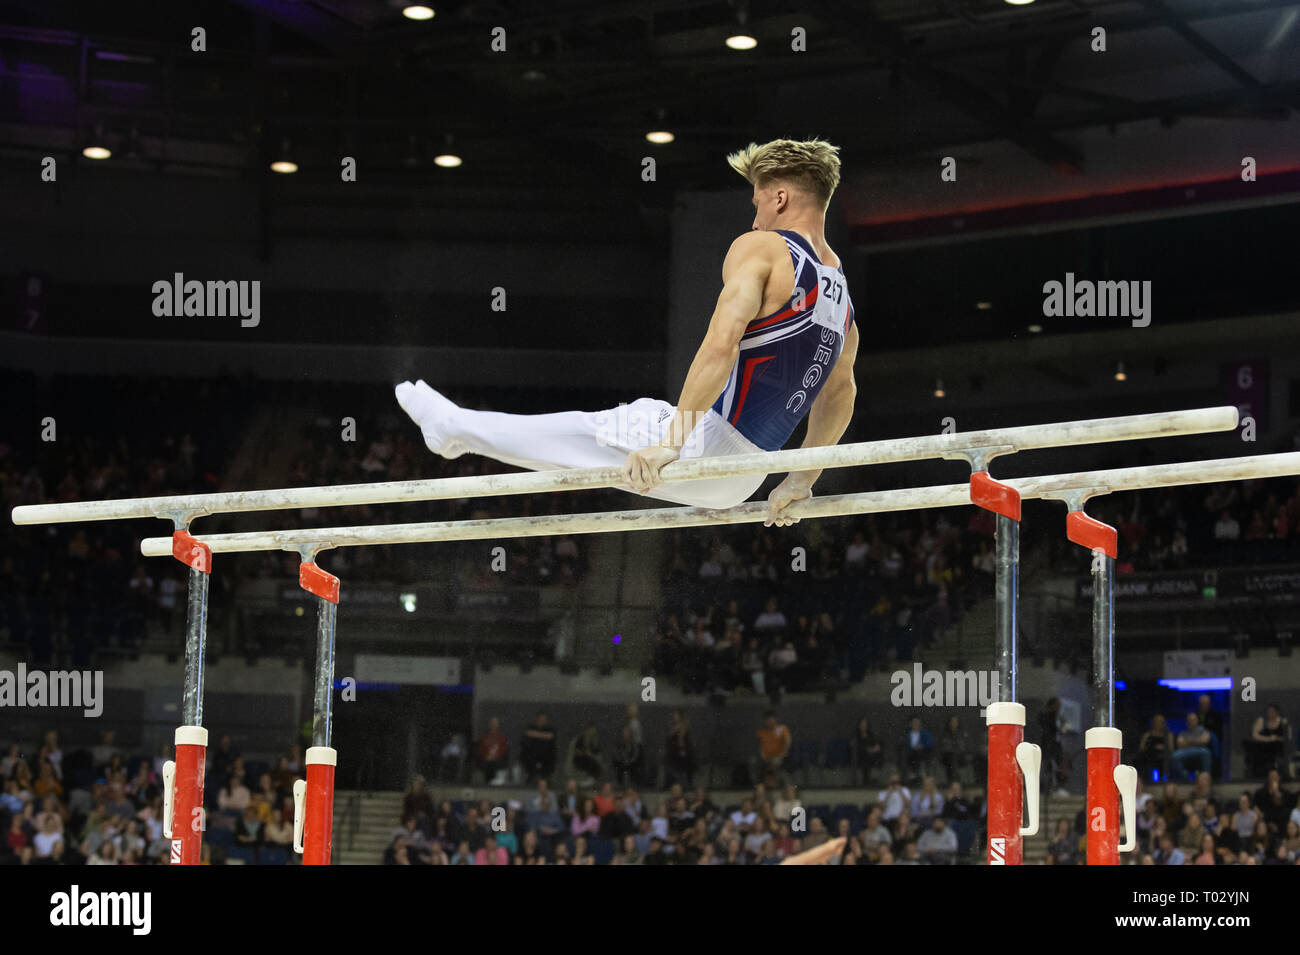 Liverpool, UK. 16th March 2019. Jay Thompson of South Essex competing at the Men’s and Women’s Artistic British Championships 2019, M&S Bank Arena, Liverpool, UK. Credit: Iain Scott Photography/Alamy Live News Stock Photo